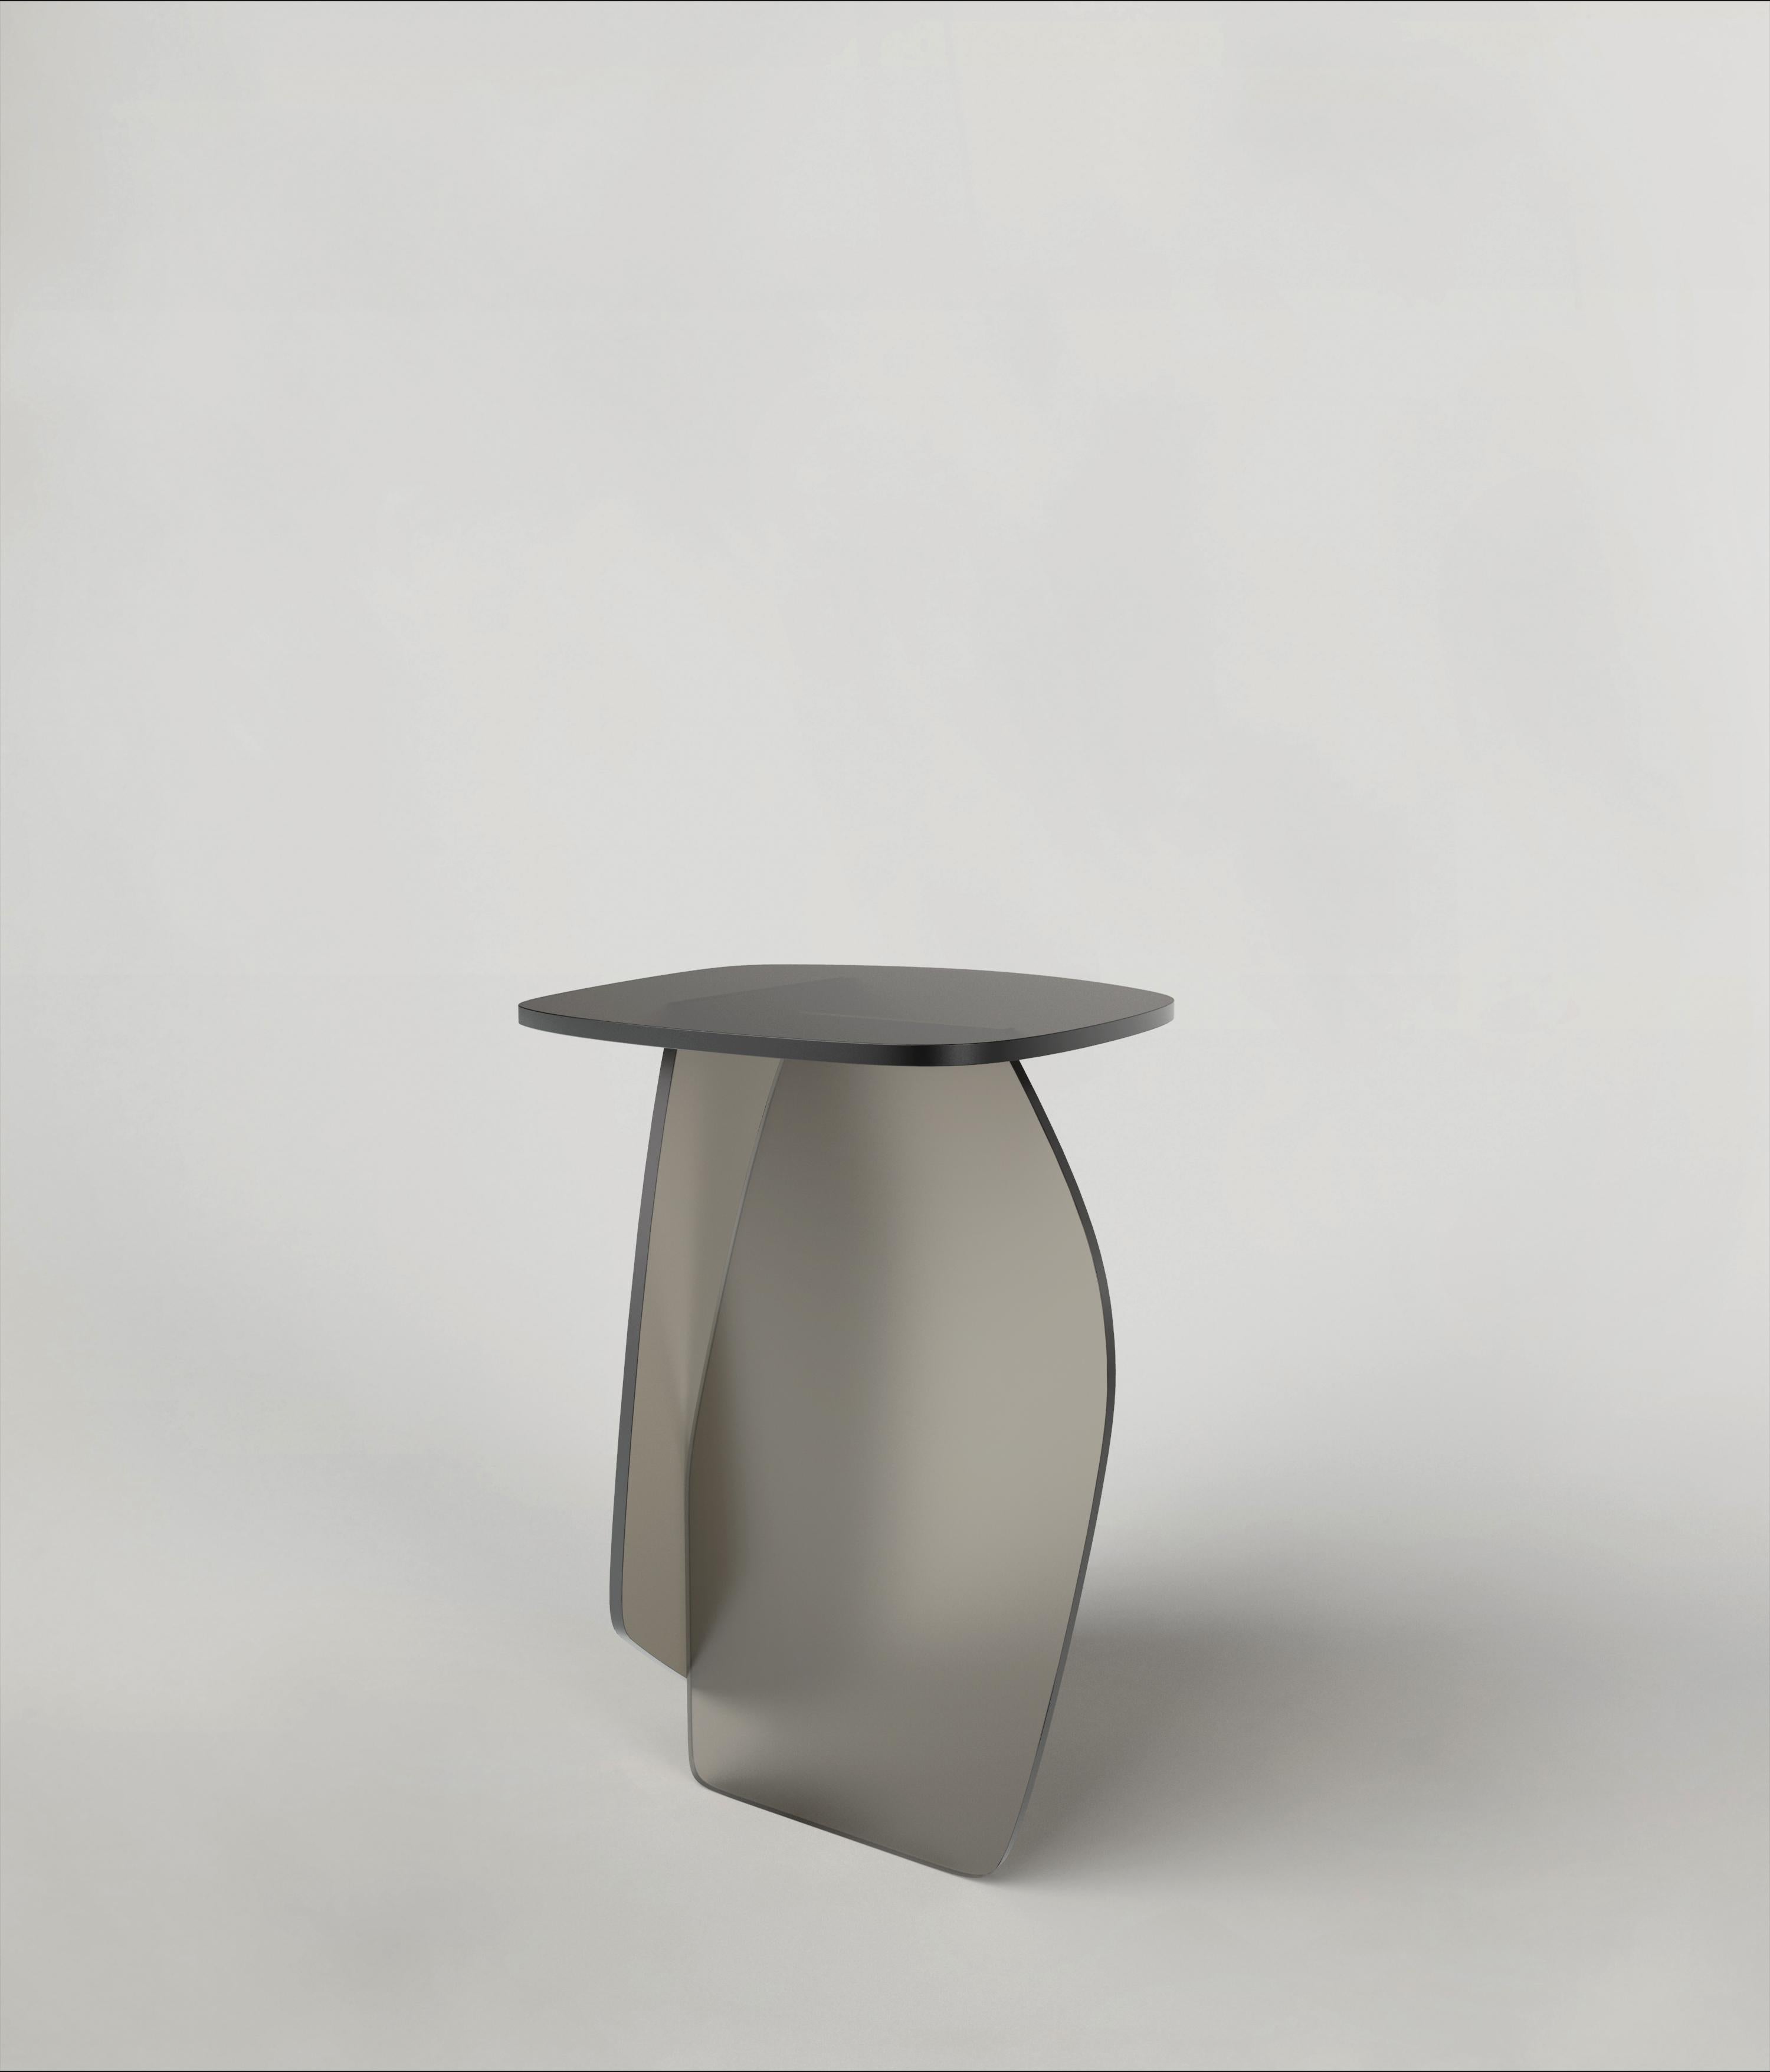 Panorama V1 Side Table by Edizione Limitata
Limited Edition of 1000 pieces. Signed and numbered.
Dimensions: D33 x W36 x H44 cm
Materials: Grey Satin Glass

Panorama V1 and V2 are respectively contemporary side and low table made by Italian artisans